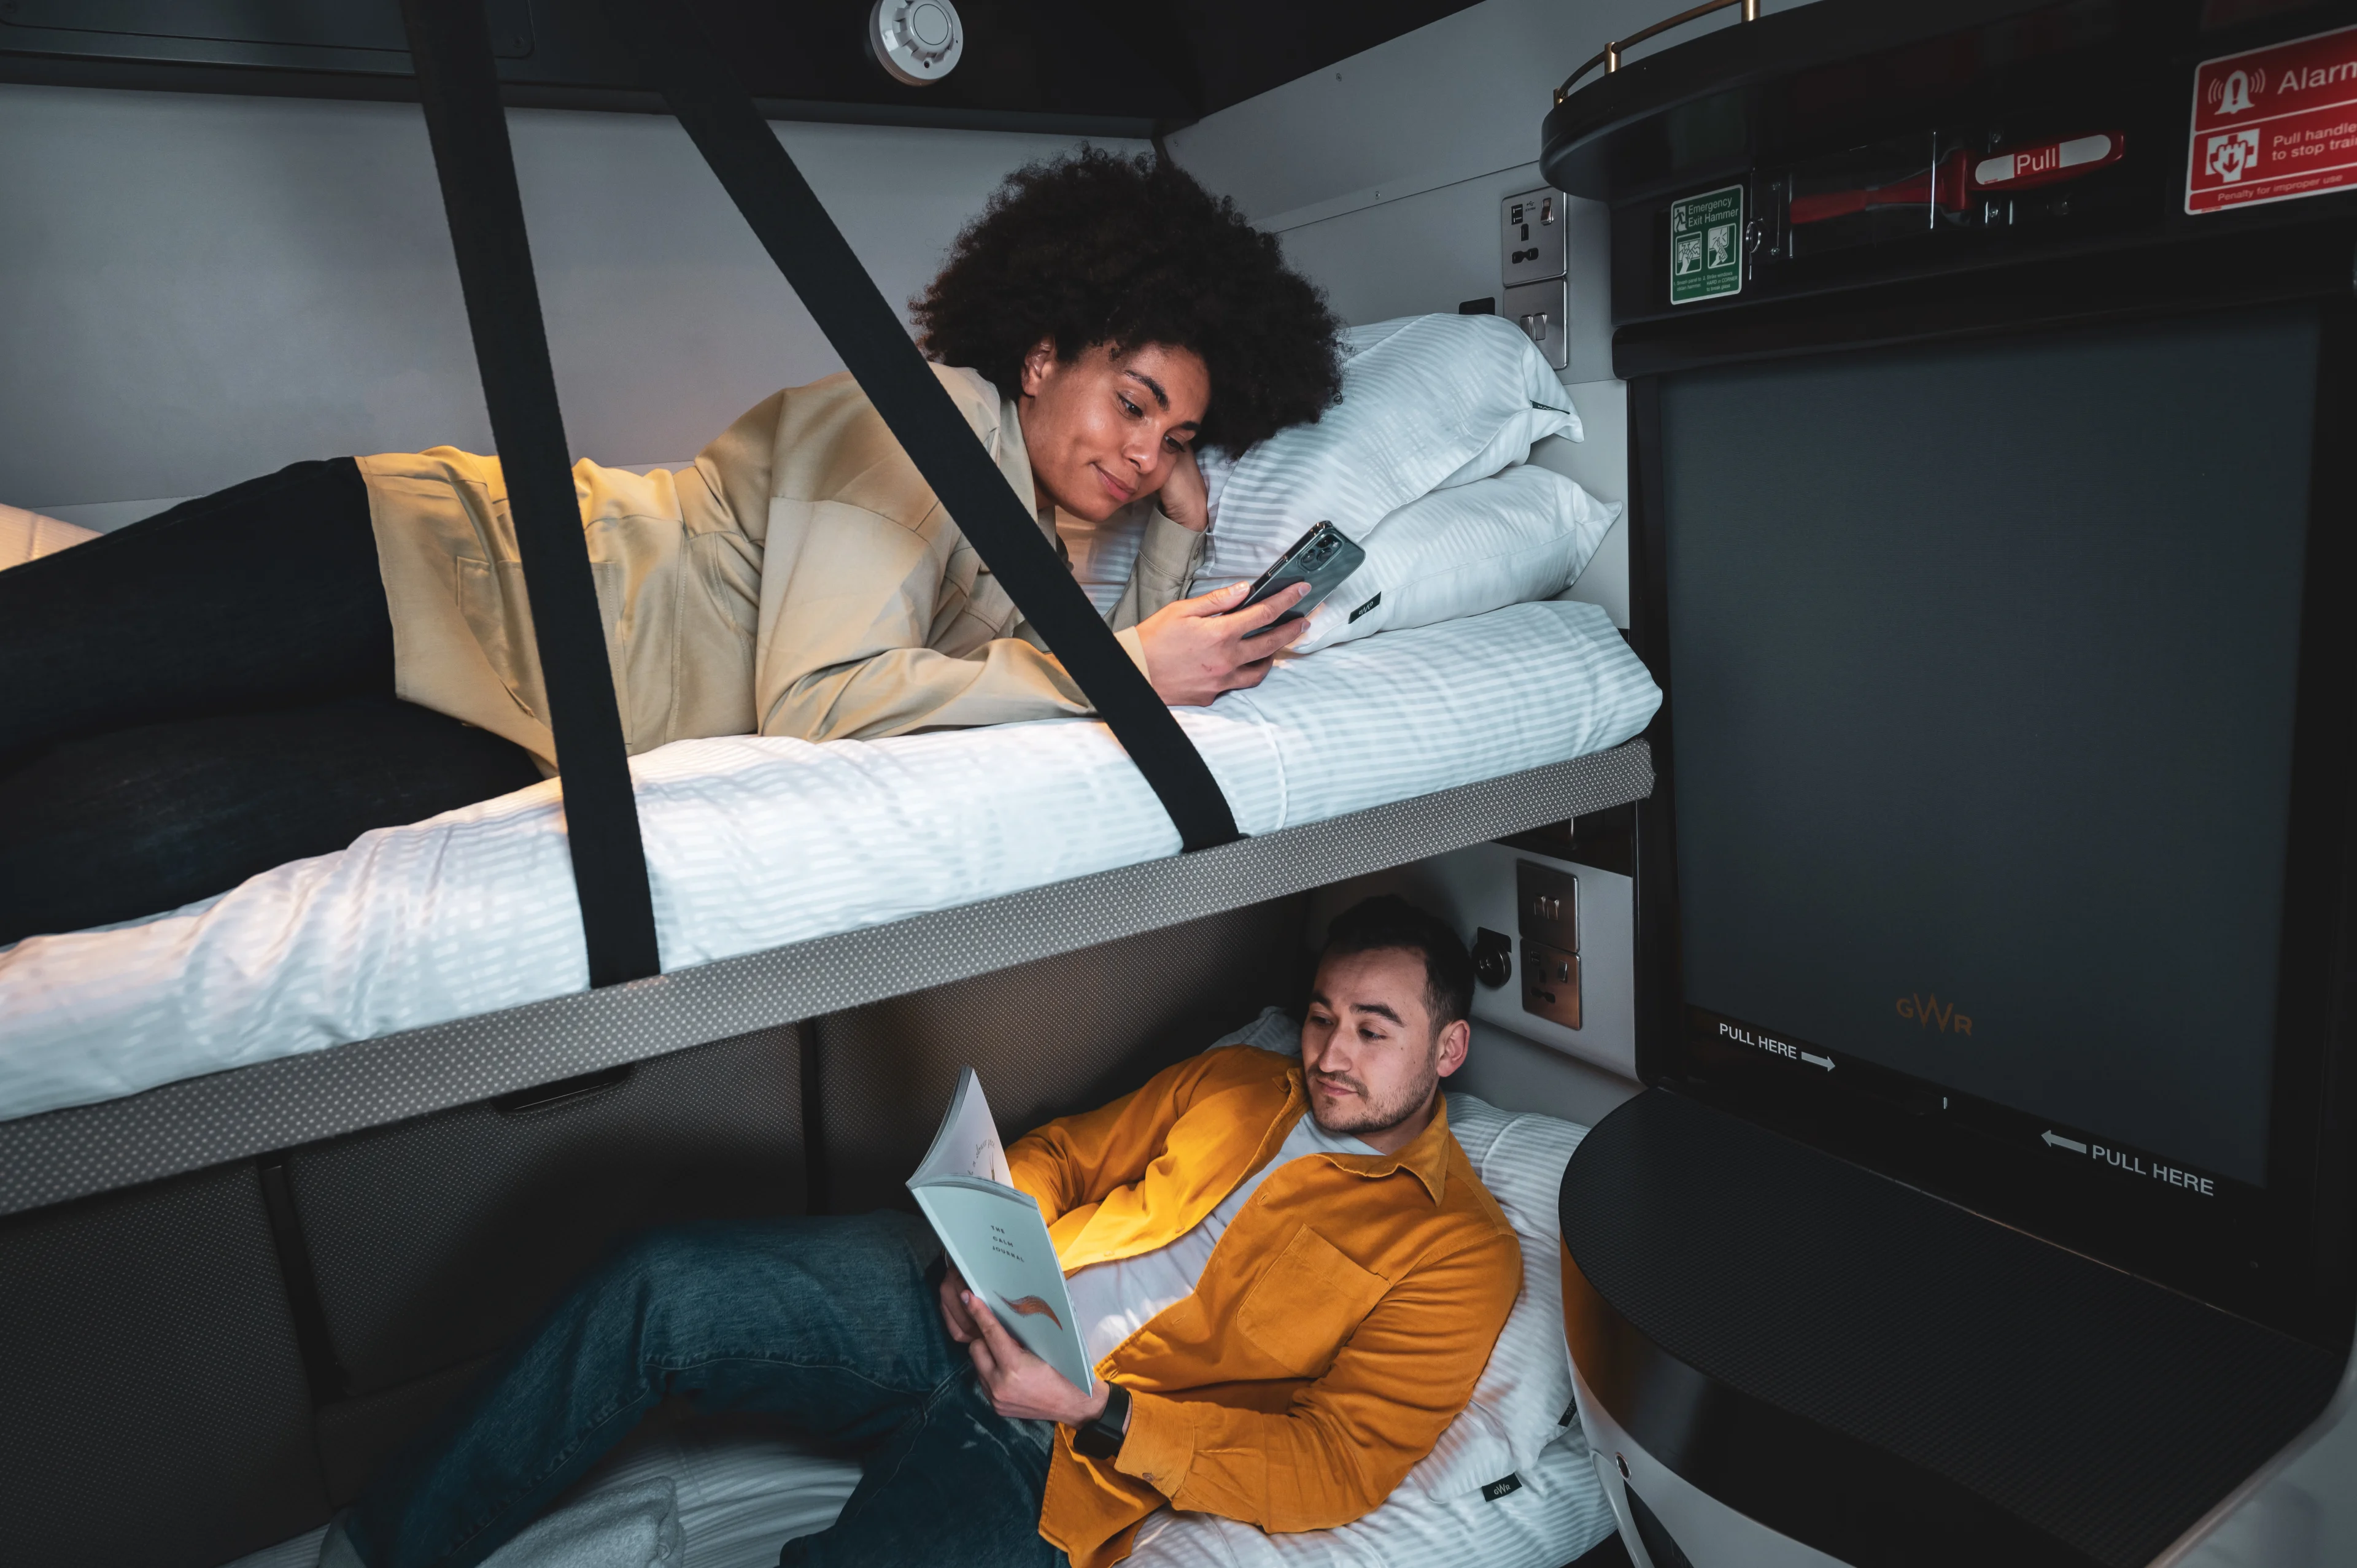 In a sleeper train carriage, a young woman lies on the top bunk looking at her phone, while a young man lies on the bottom bunk reading a book